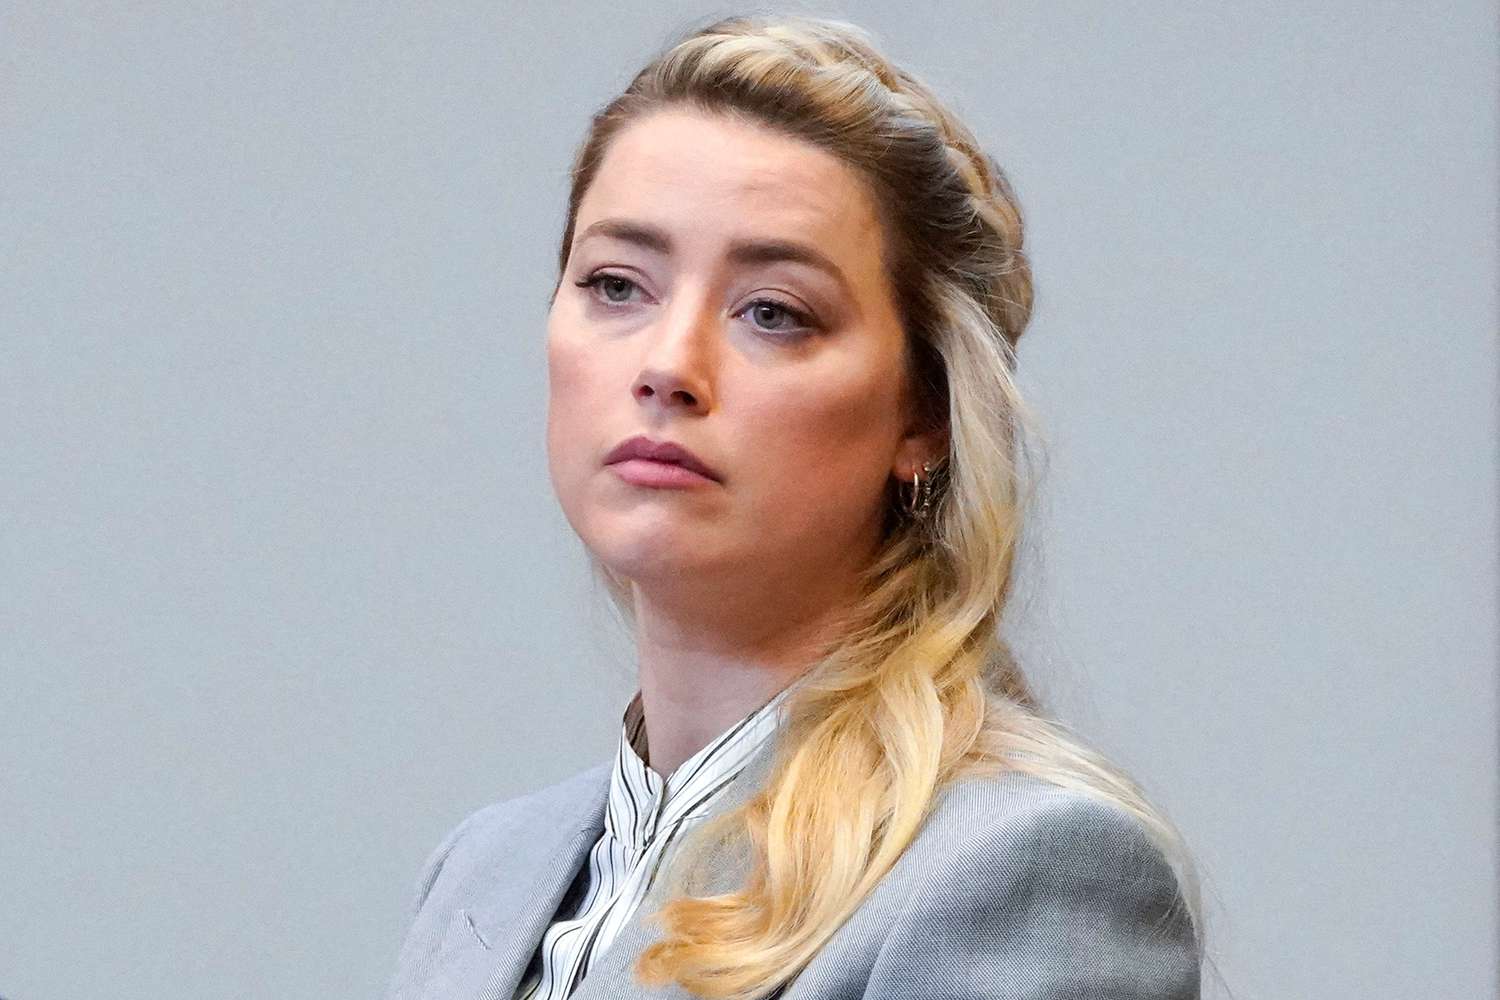 Amber Heard hires new lawyers to appeal verdict in Johnny Depp defamation trial